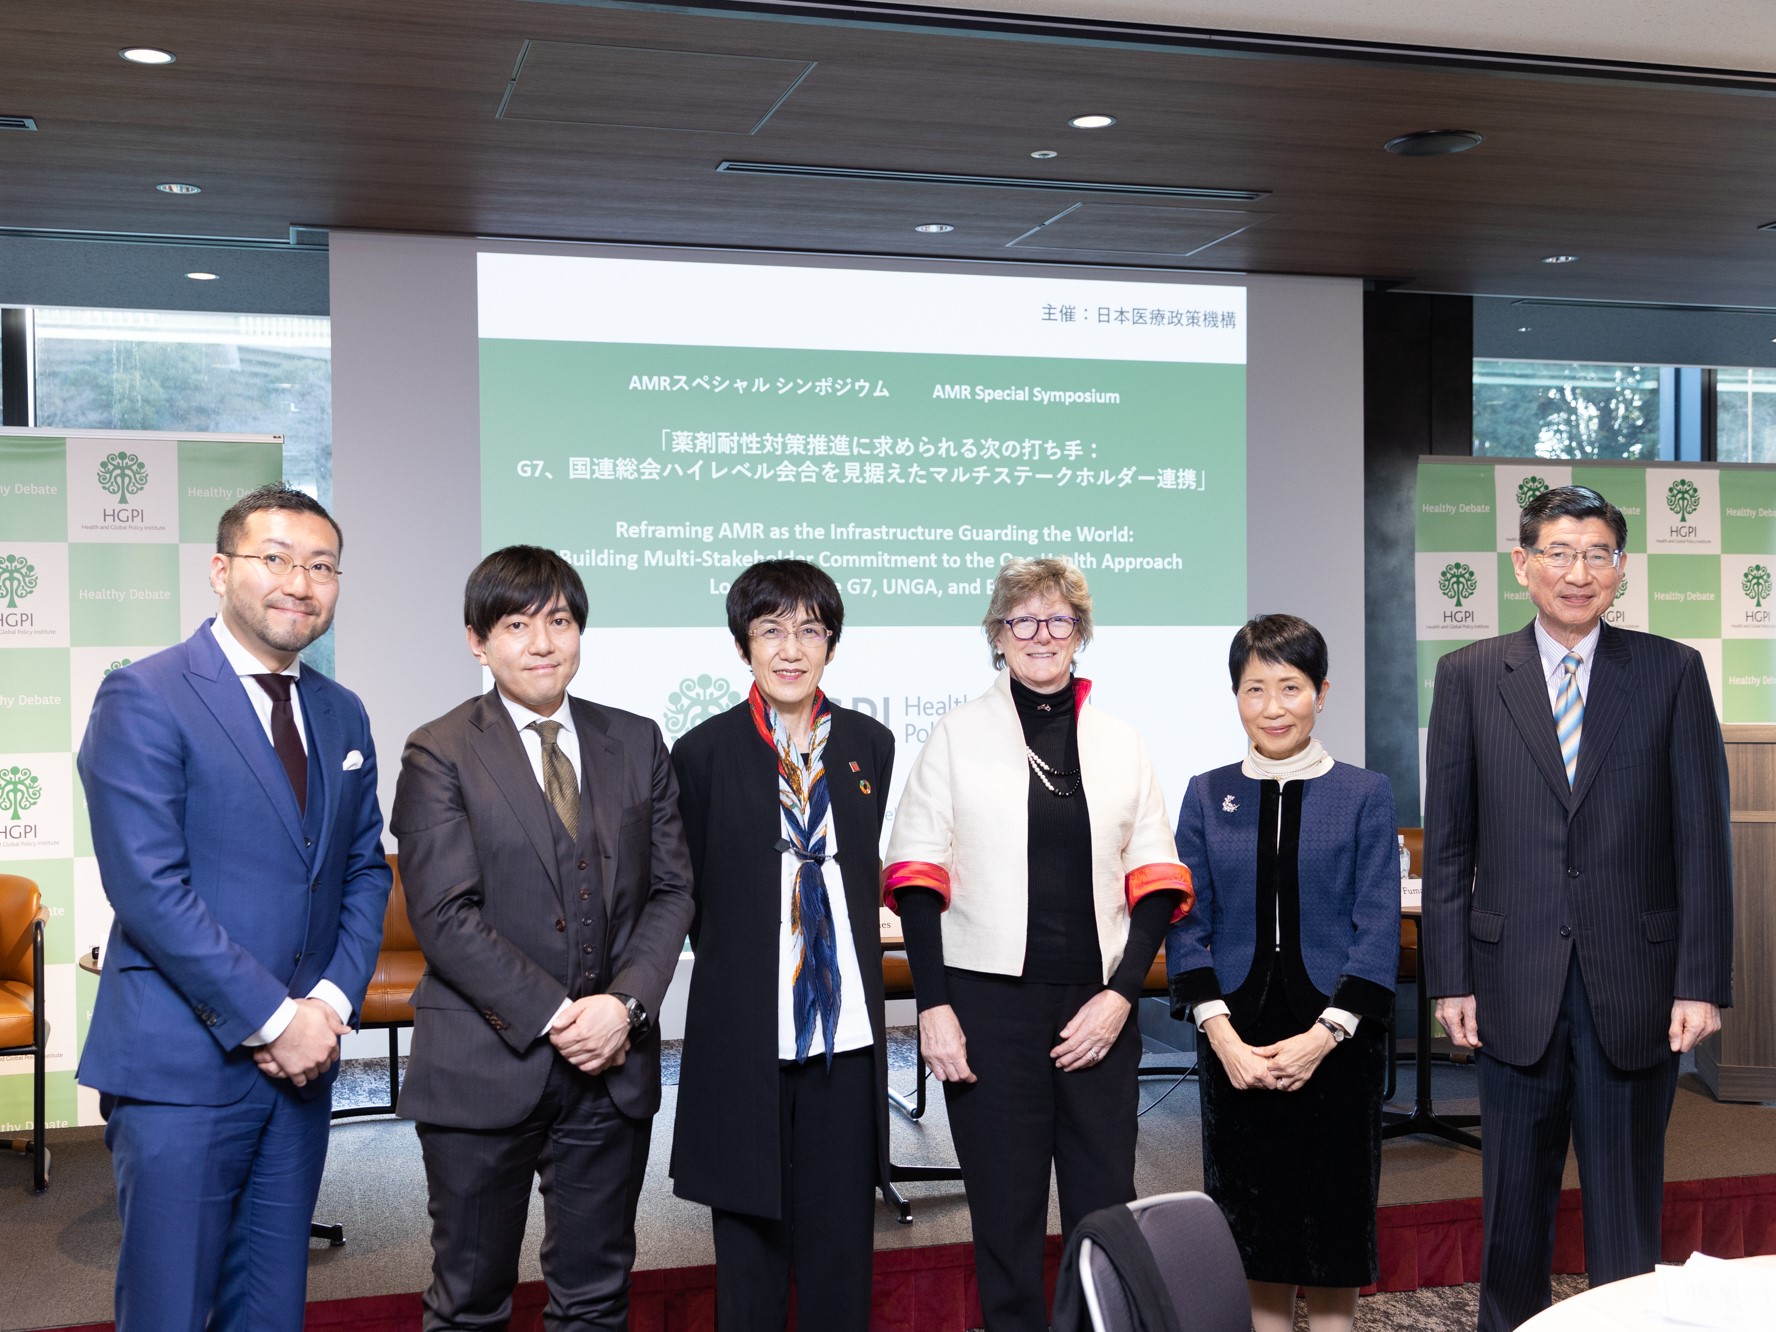 [Event Report] AMR Special Symposium “Reframing AMR as the Infrastructure Guarding the World: Building Multi-Stakeholder Commitment to the One Health Approach Looking to the G7, UNGA, and Beyond” (February 28, 2023)